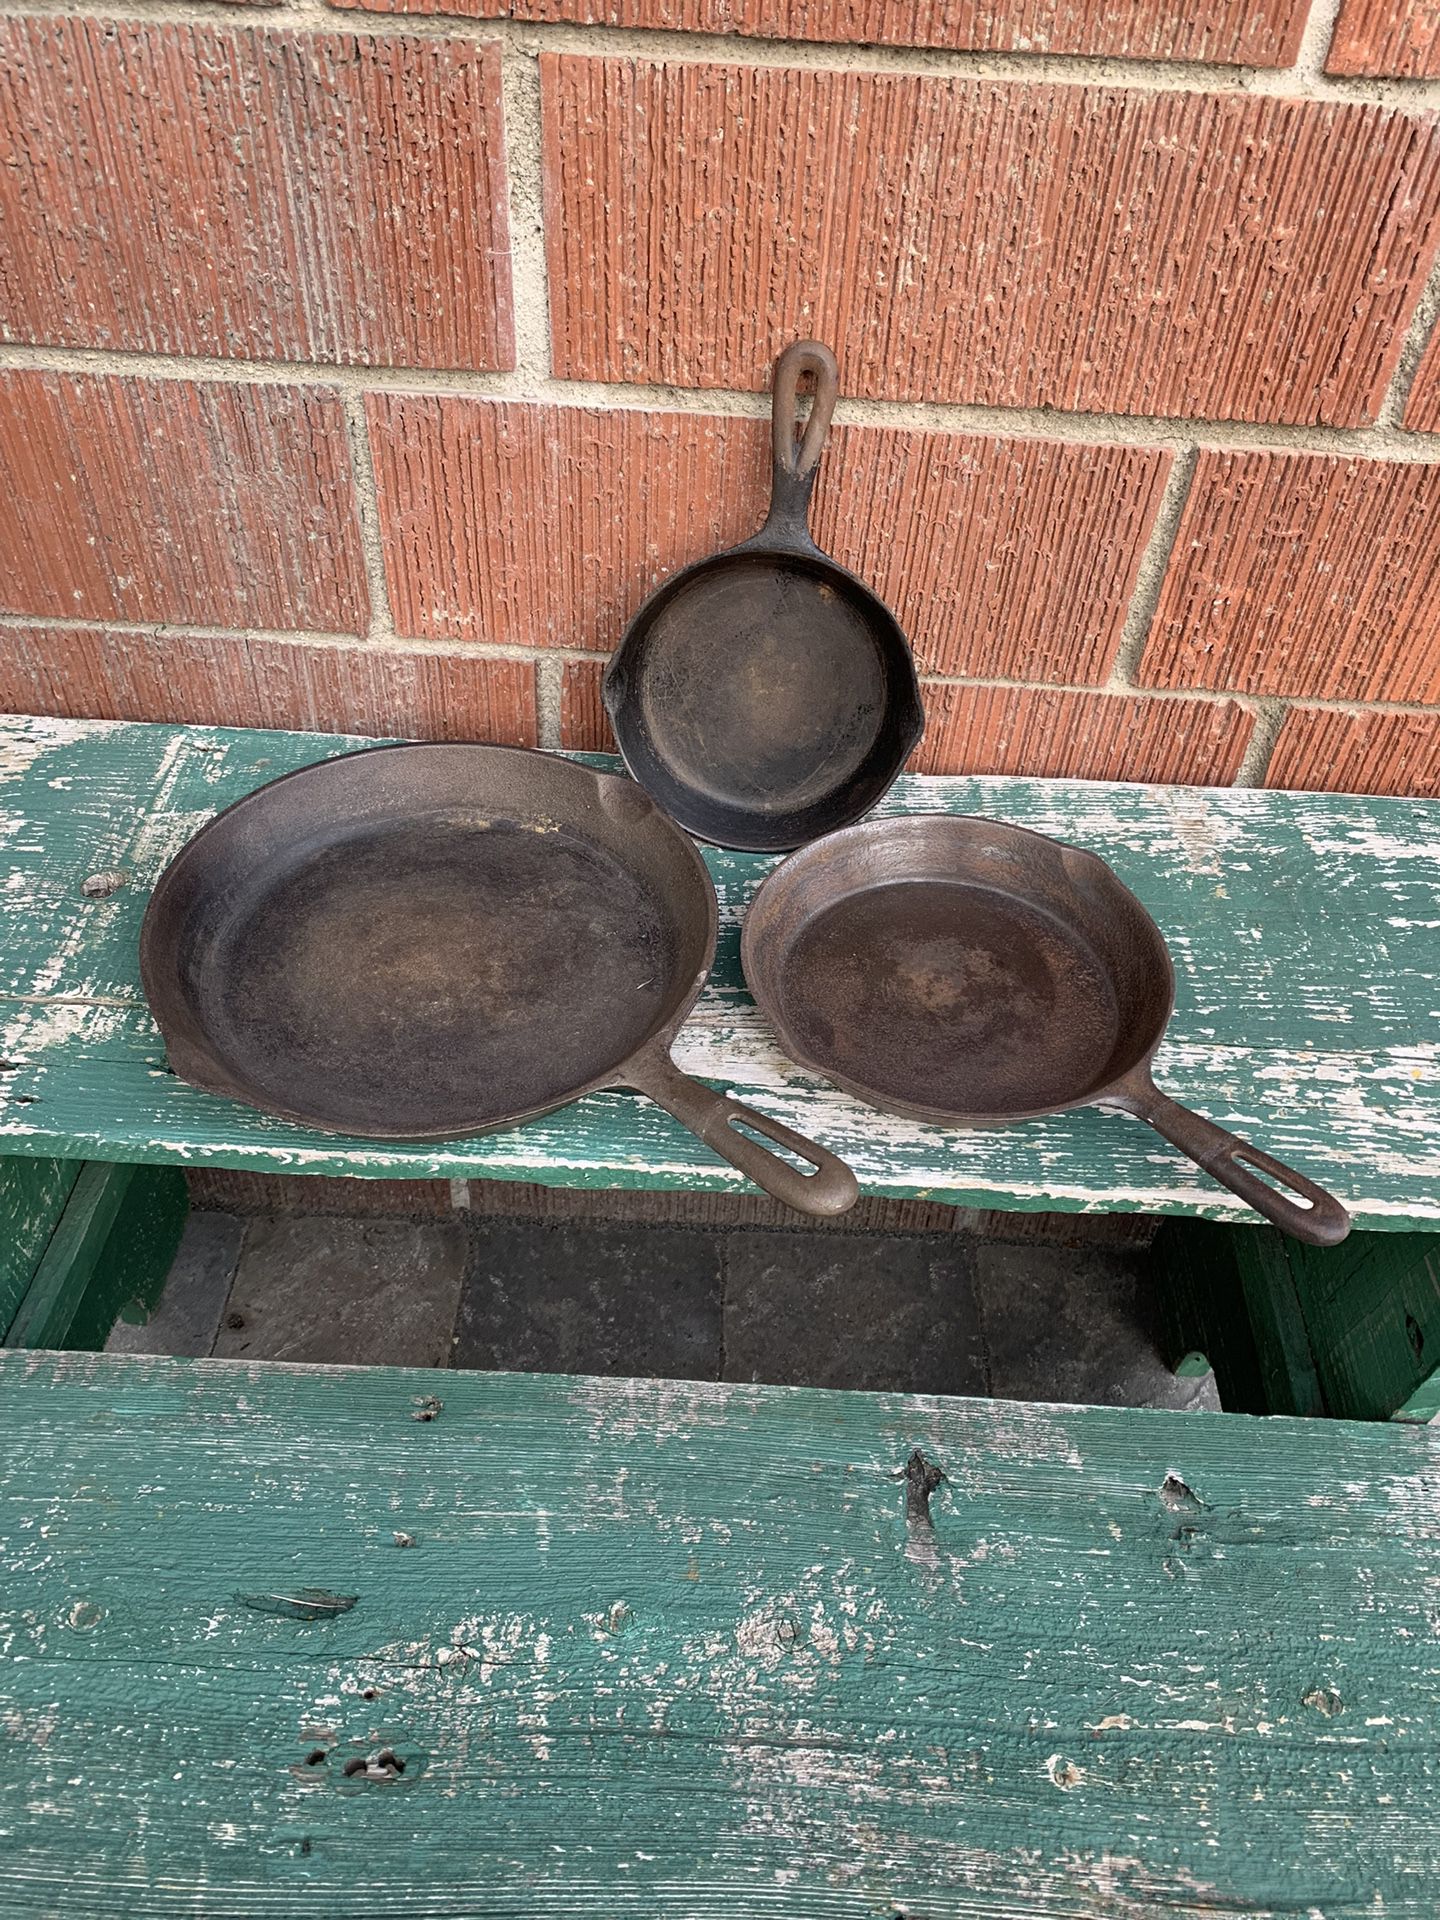 Vintage Cast Iron Pans ($25 For All Three)